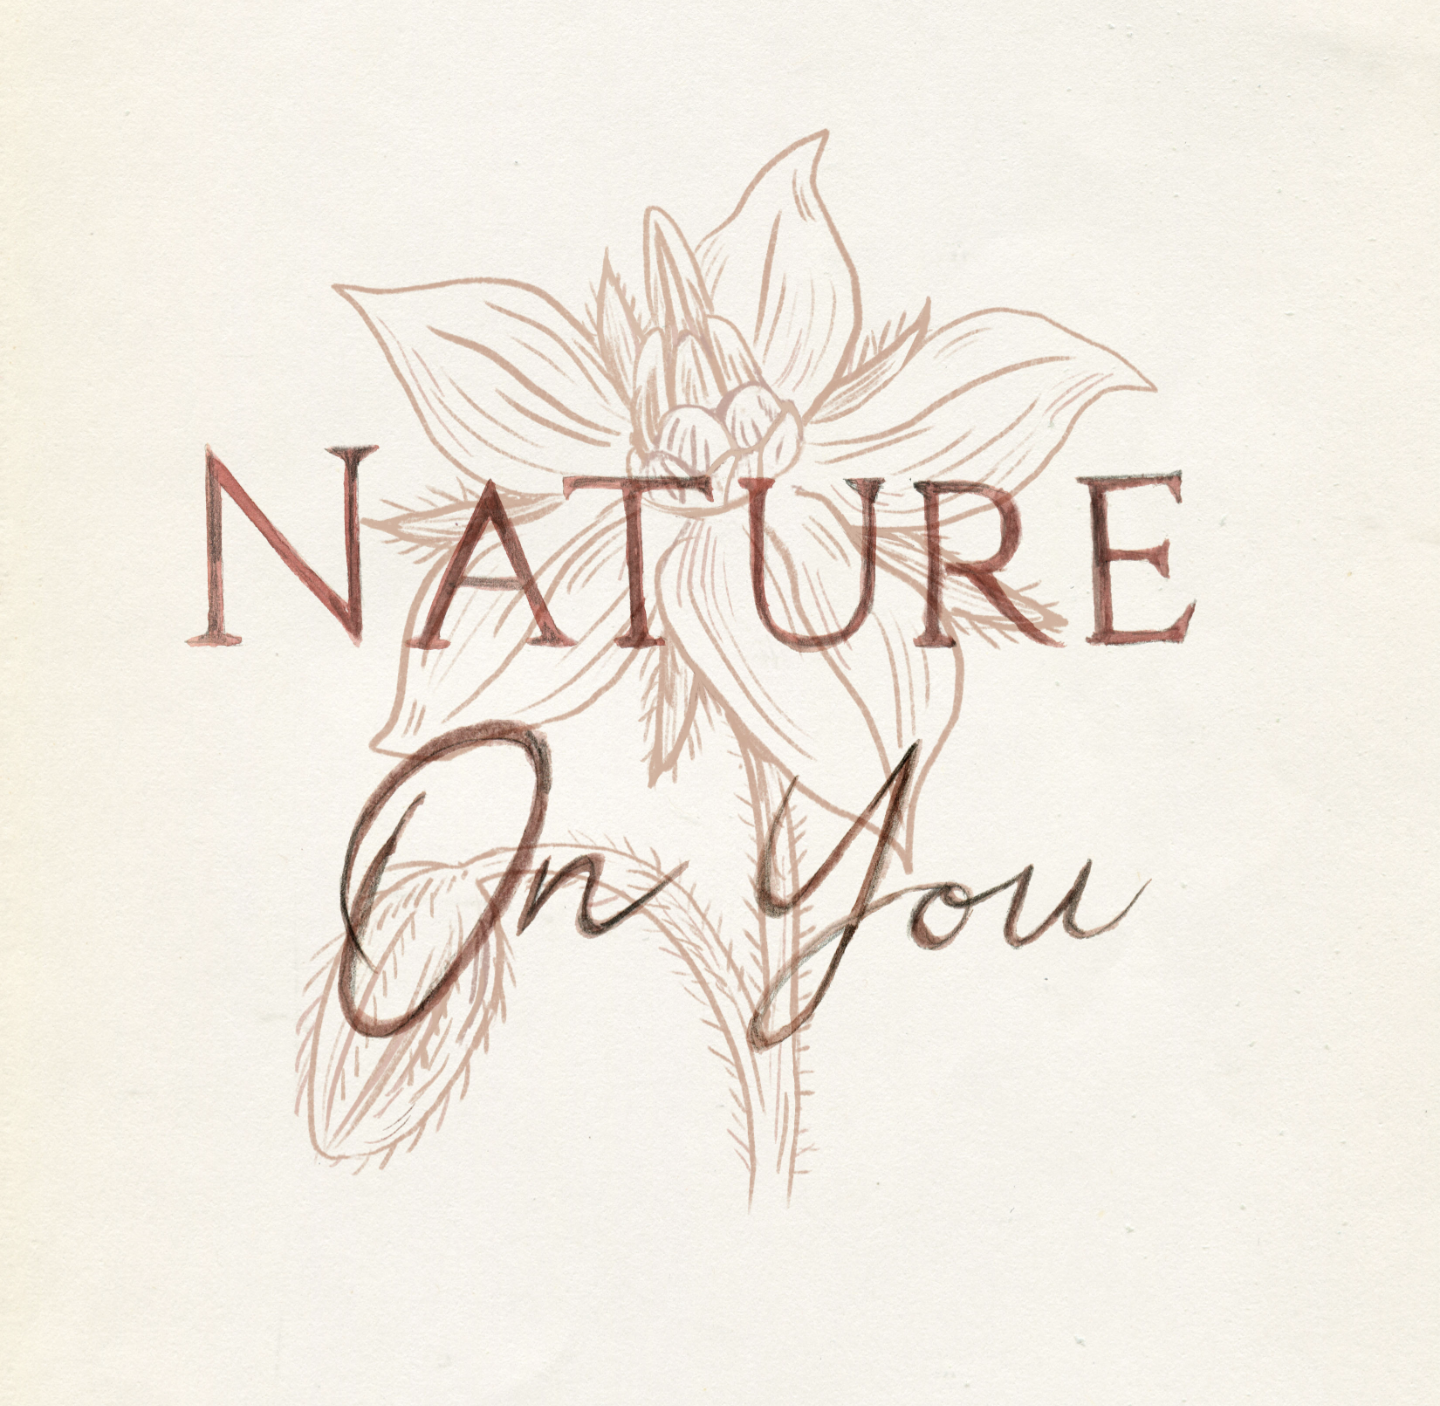 Nature On You